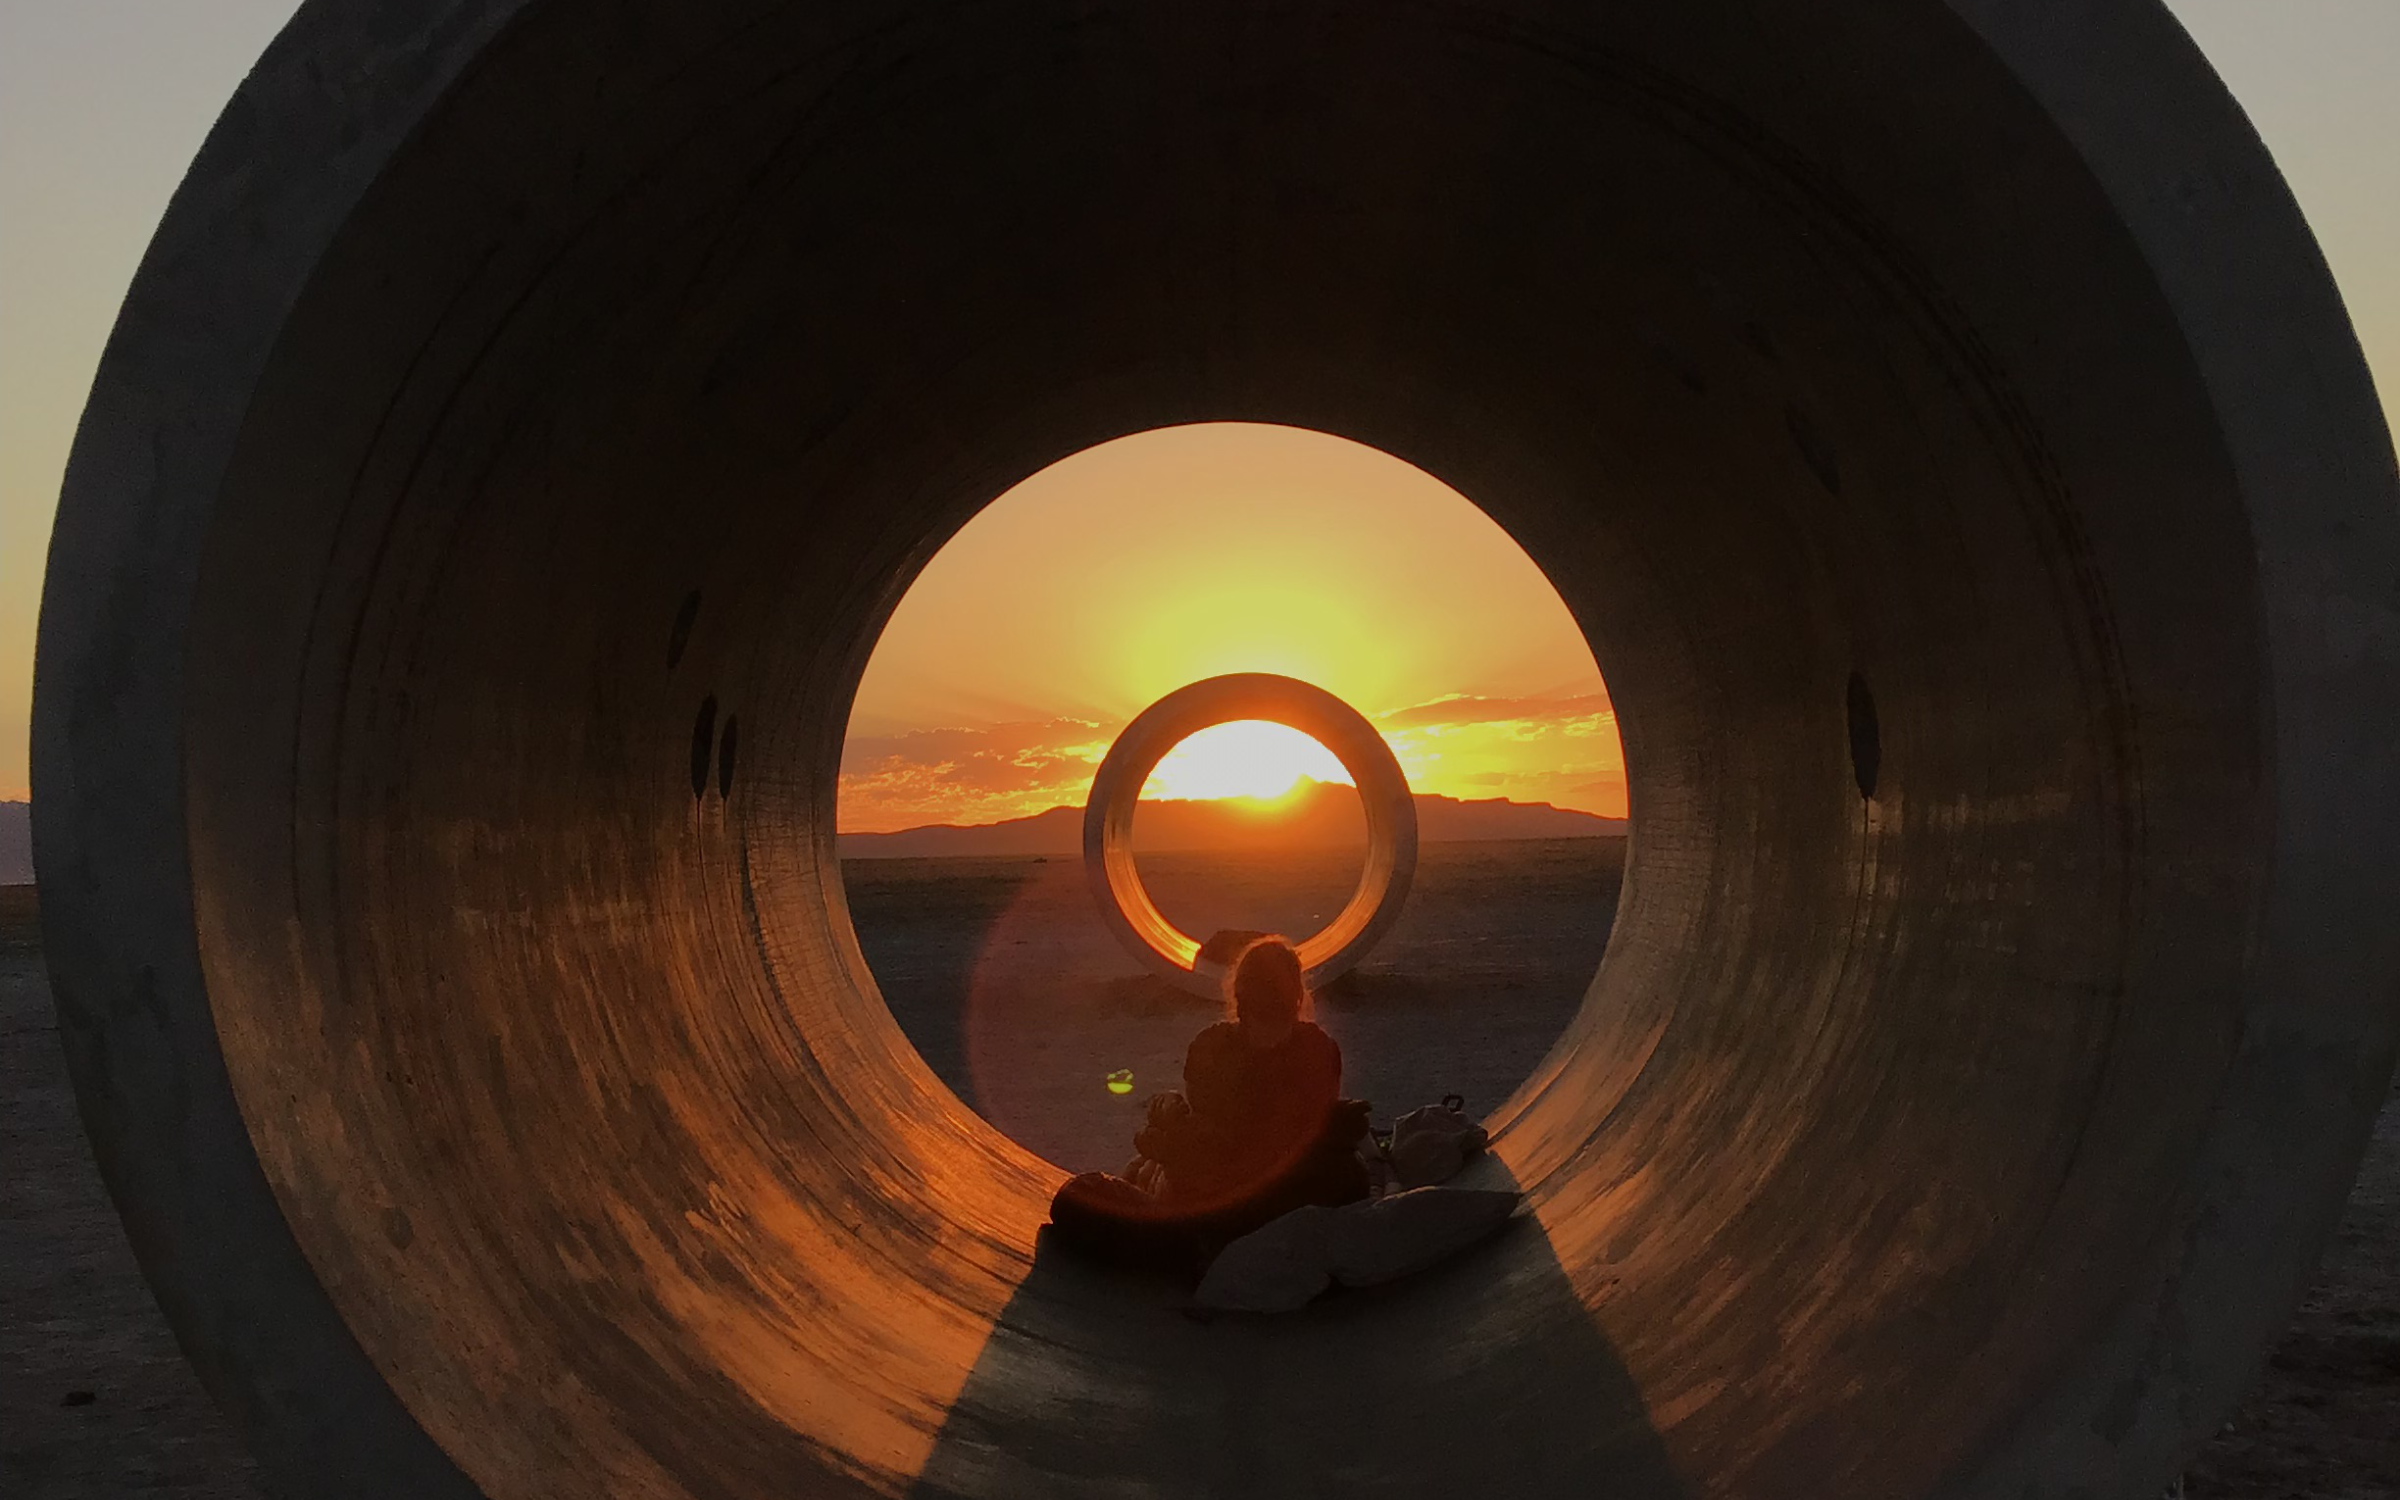 Two concrete tunnels line up with the setting sun. A person sits silhouetted between the two tunnels surrounded by warm orange light.